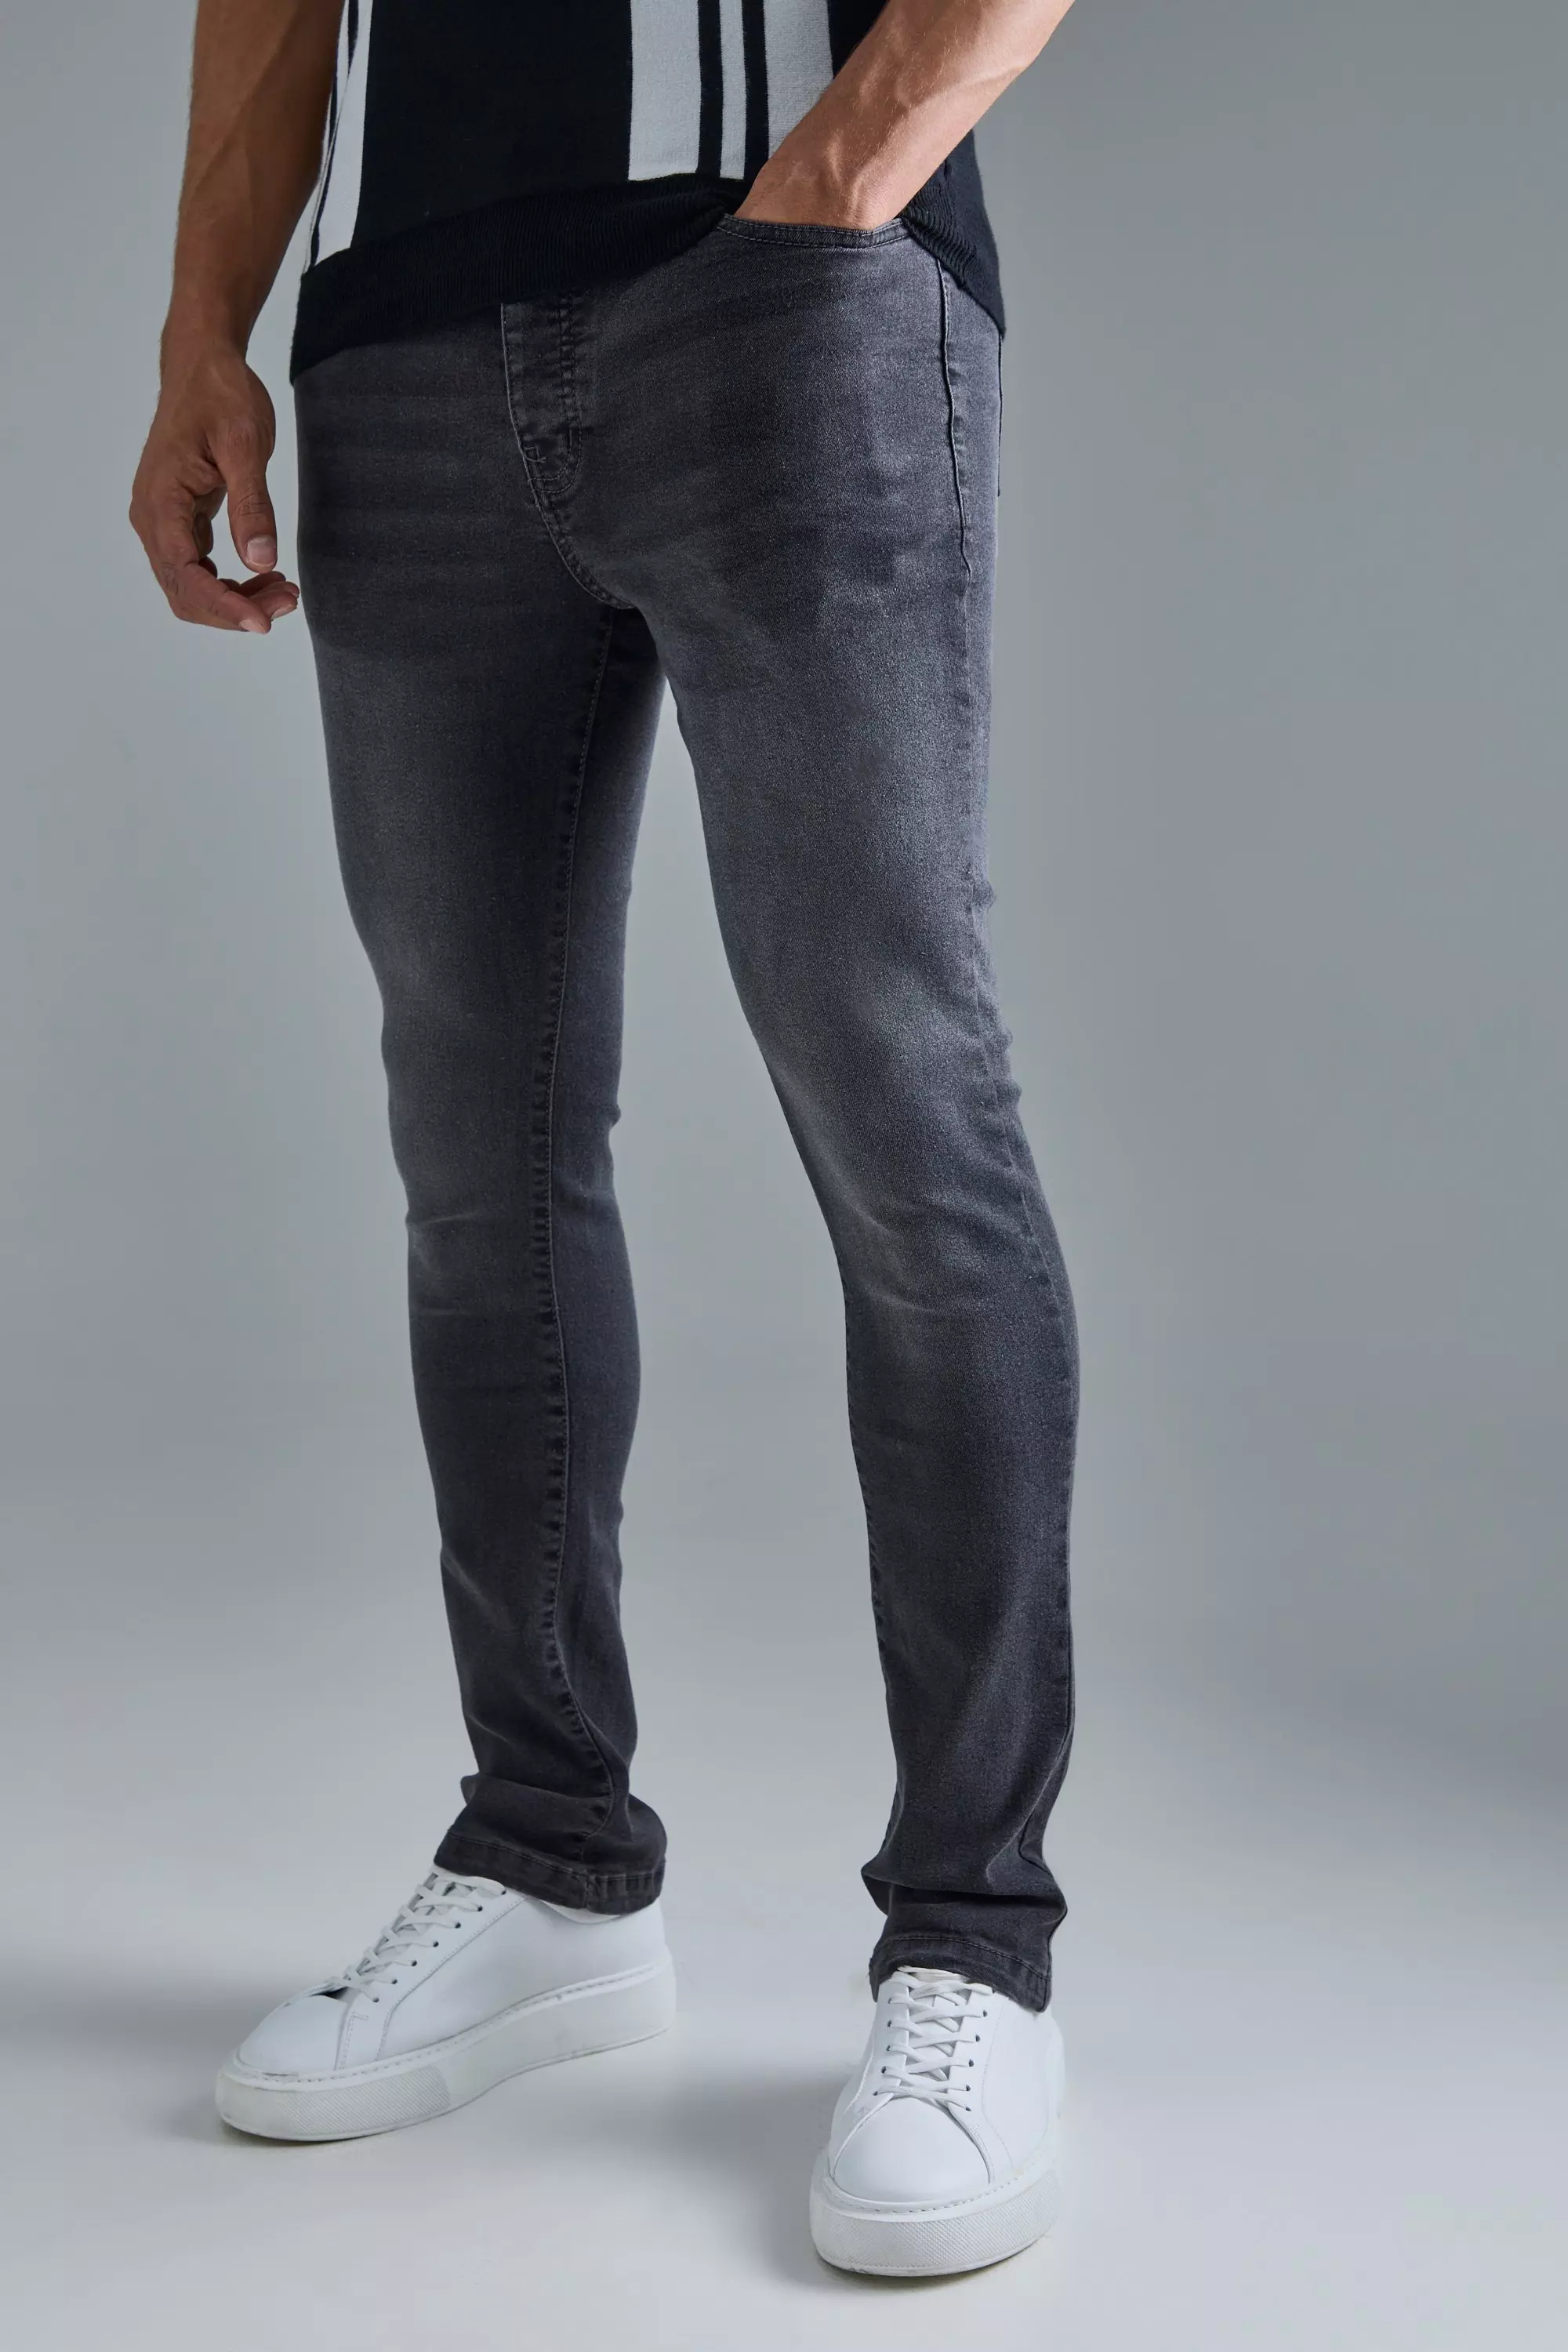 Skinny Stretch Flare Jean In Charcoal Charcoal